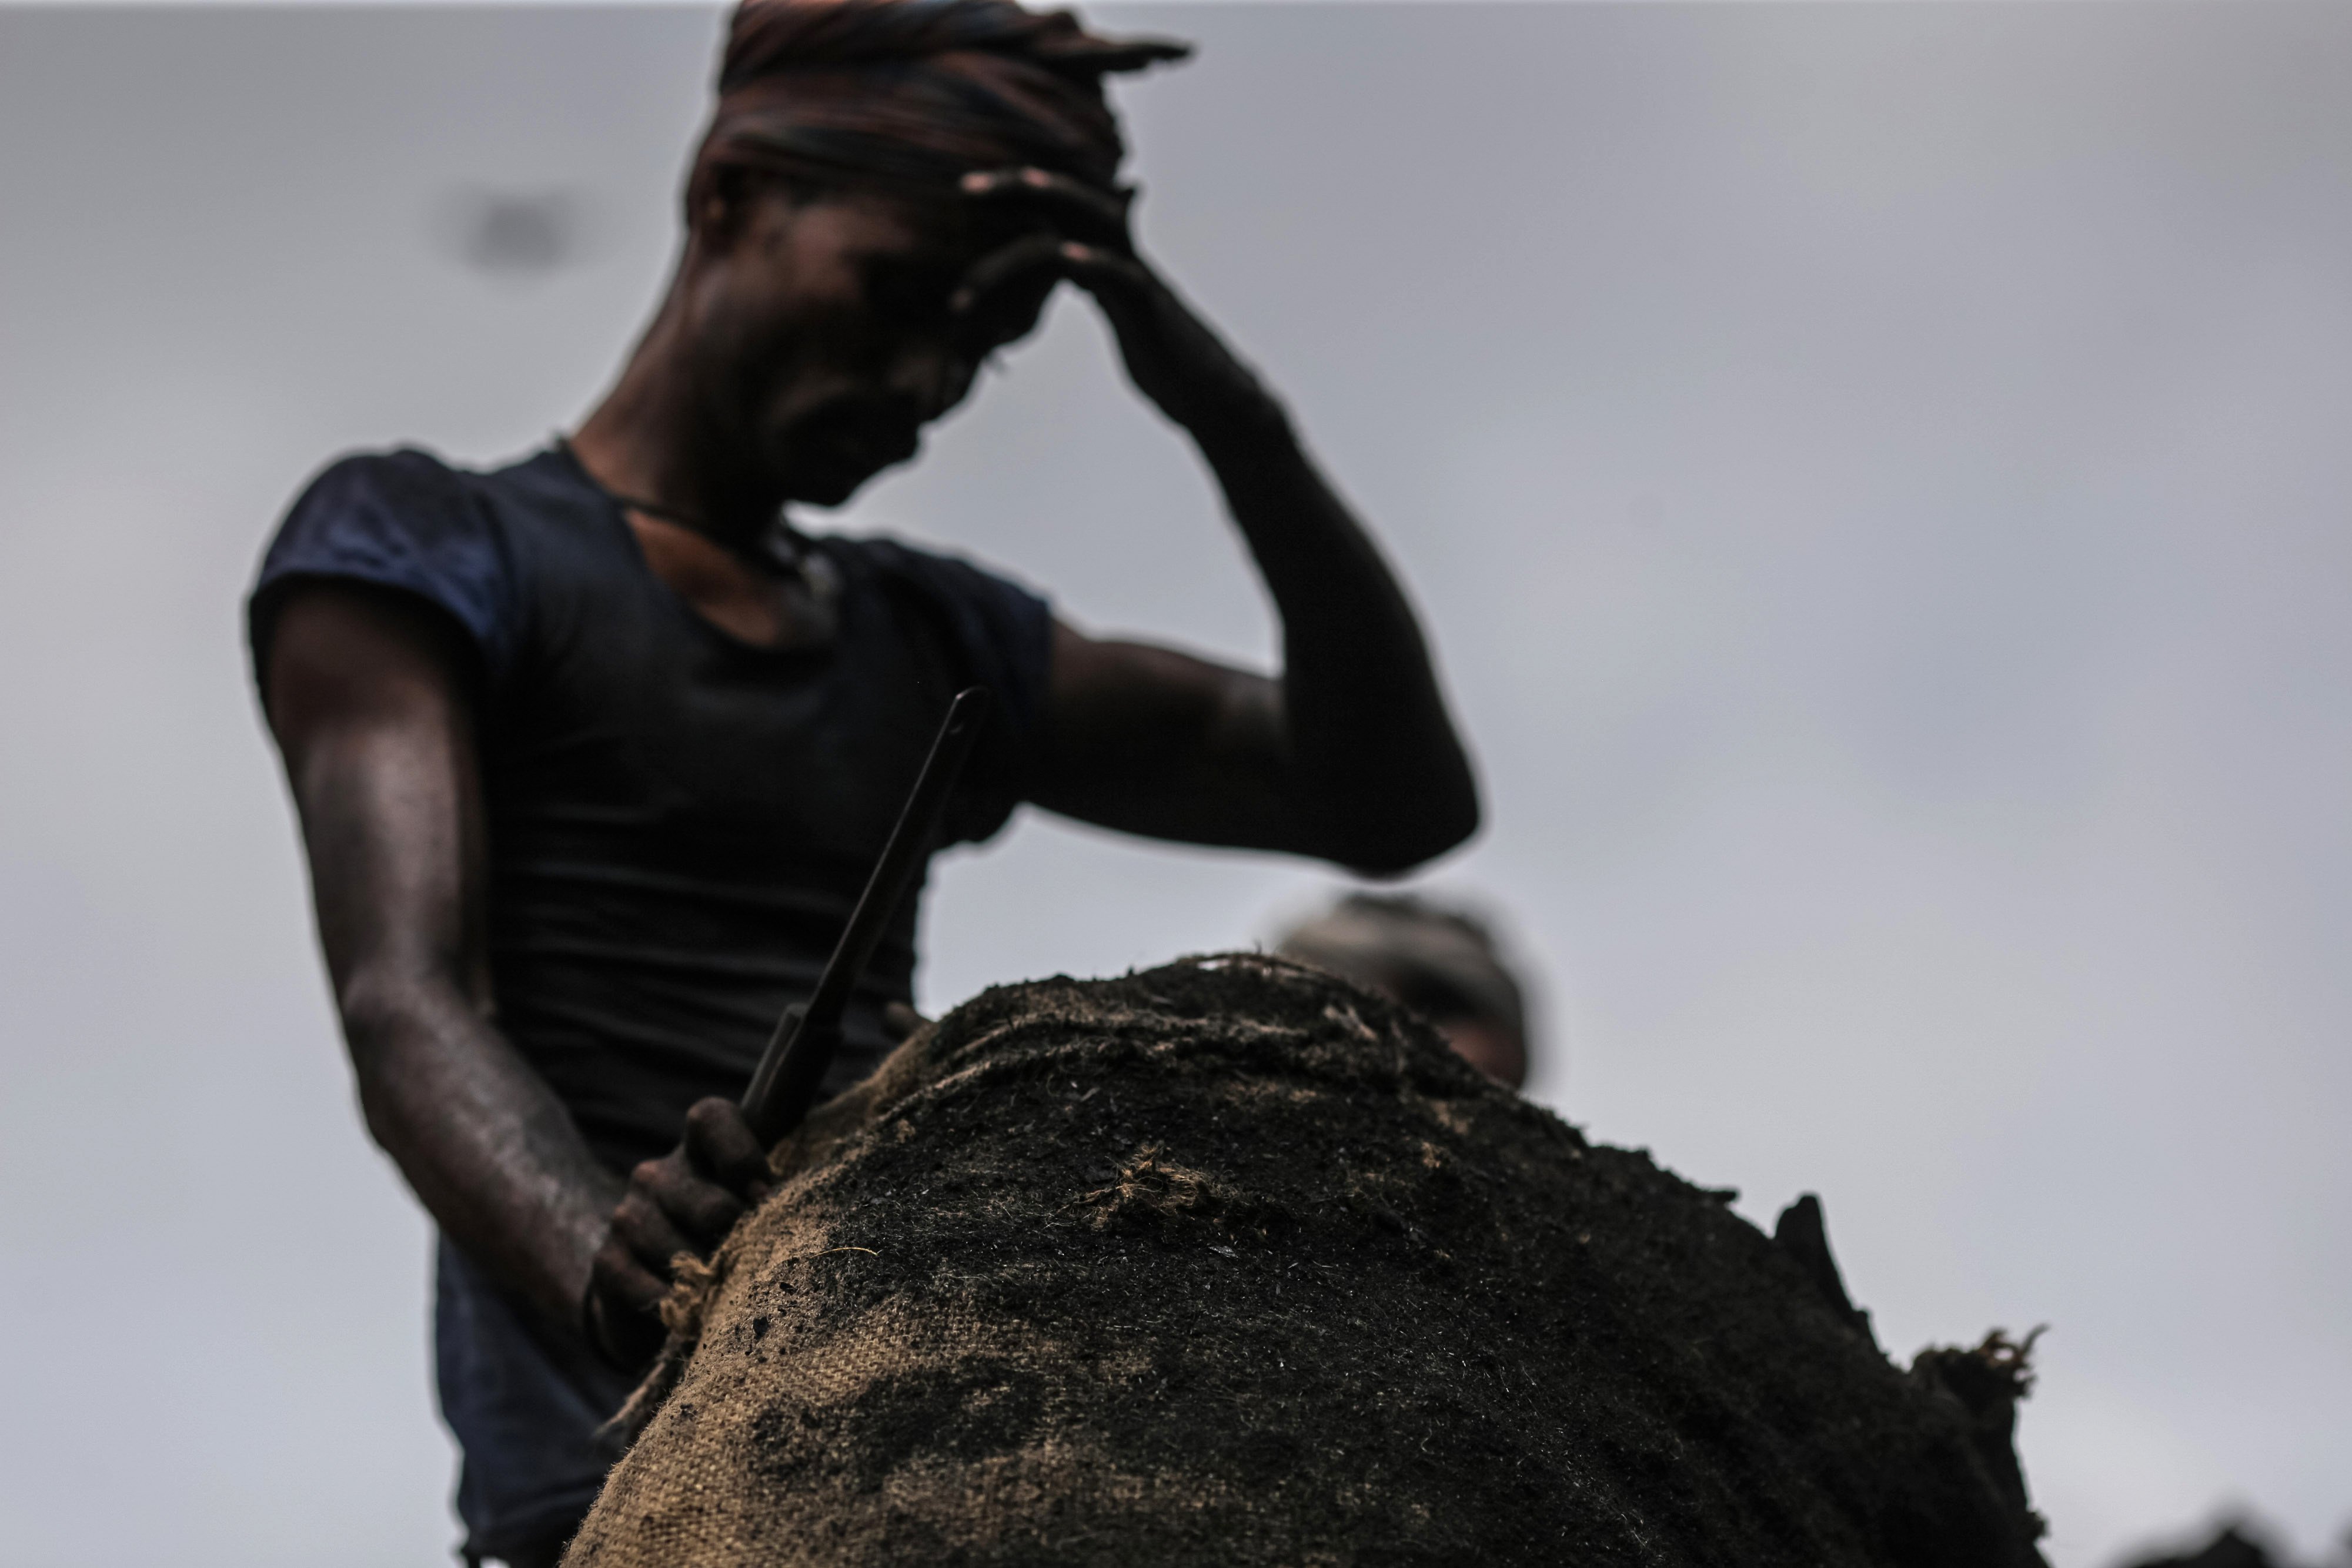 A worker unloads a sack of charcoal from a truck at a wholesale market in Mumbai on August 9. Photo: Bloomberg